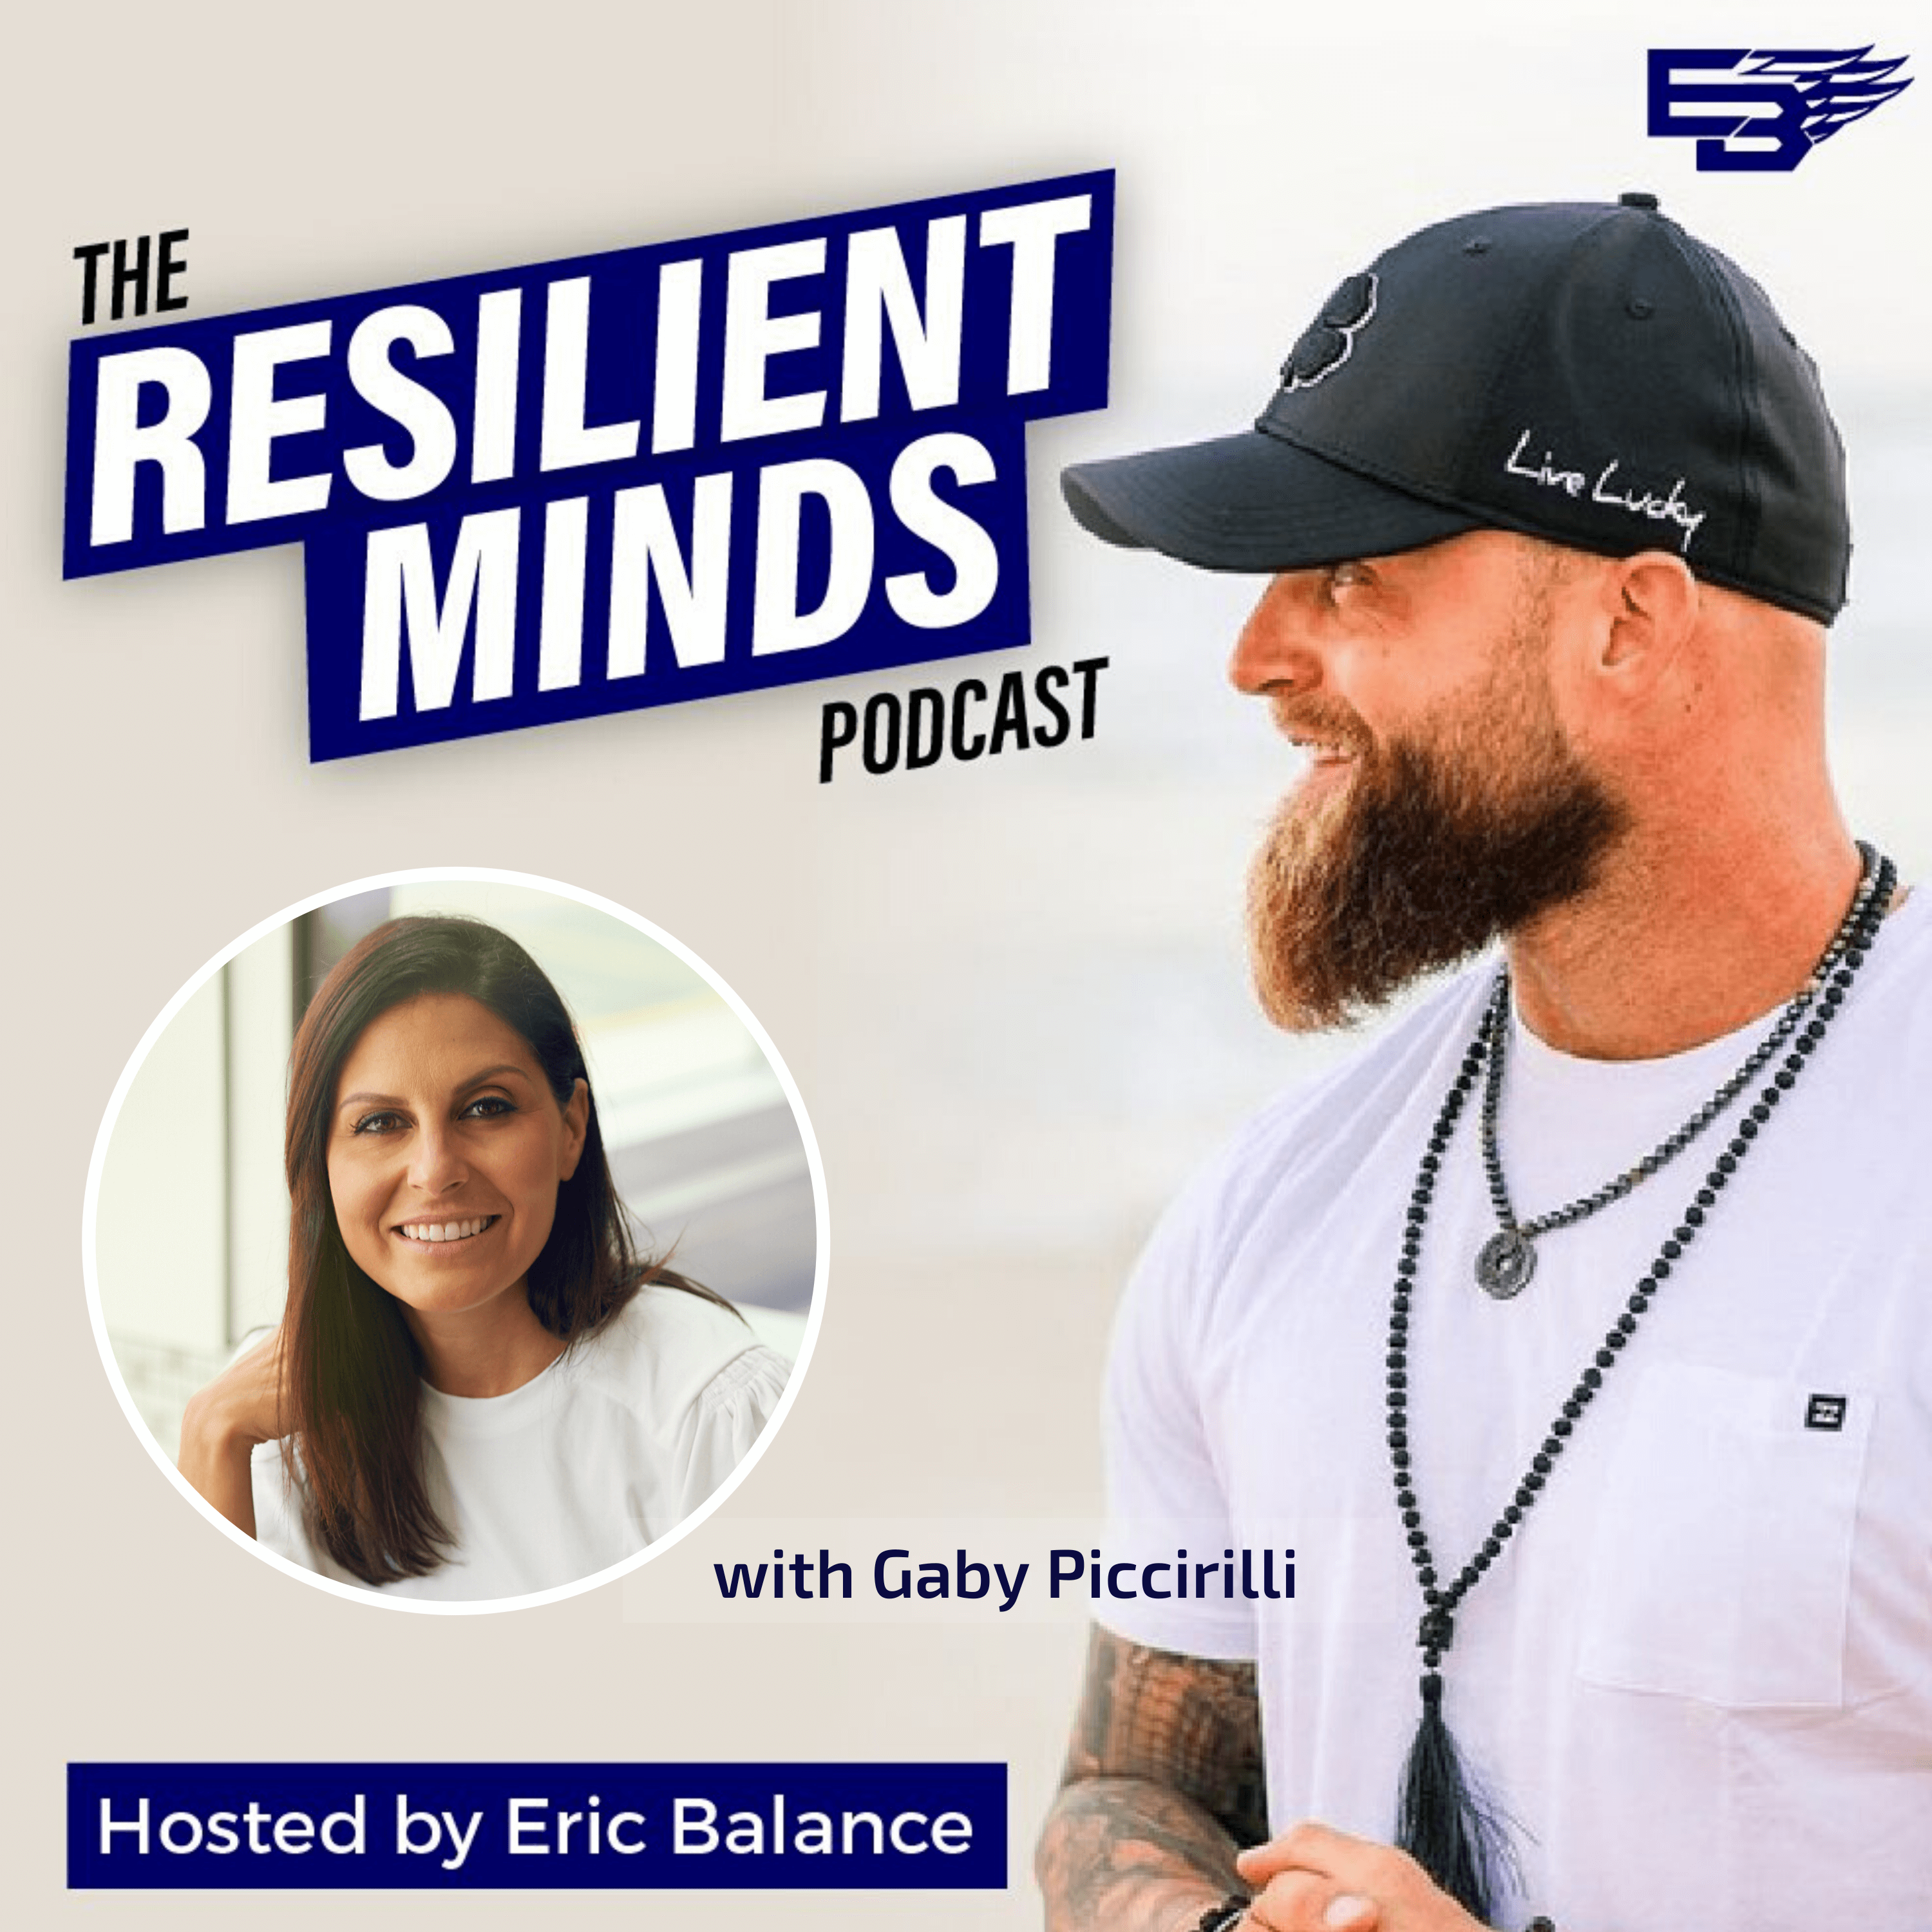 Episode 22 – What Does Health Mean to You with Gaby Piccirilli.